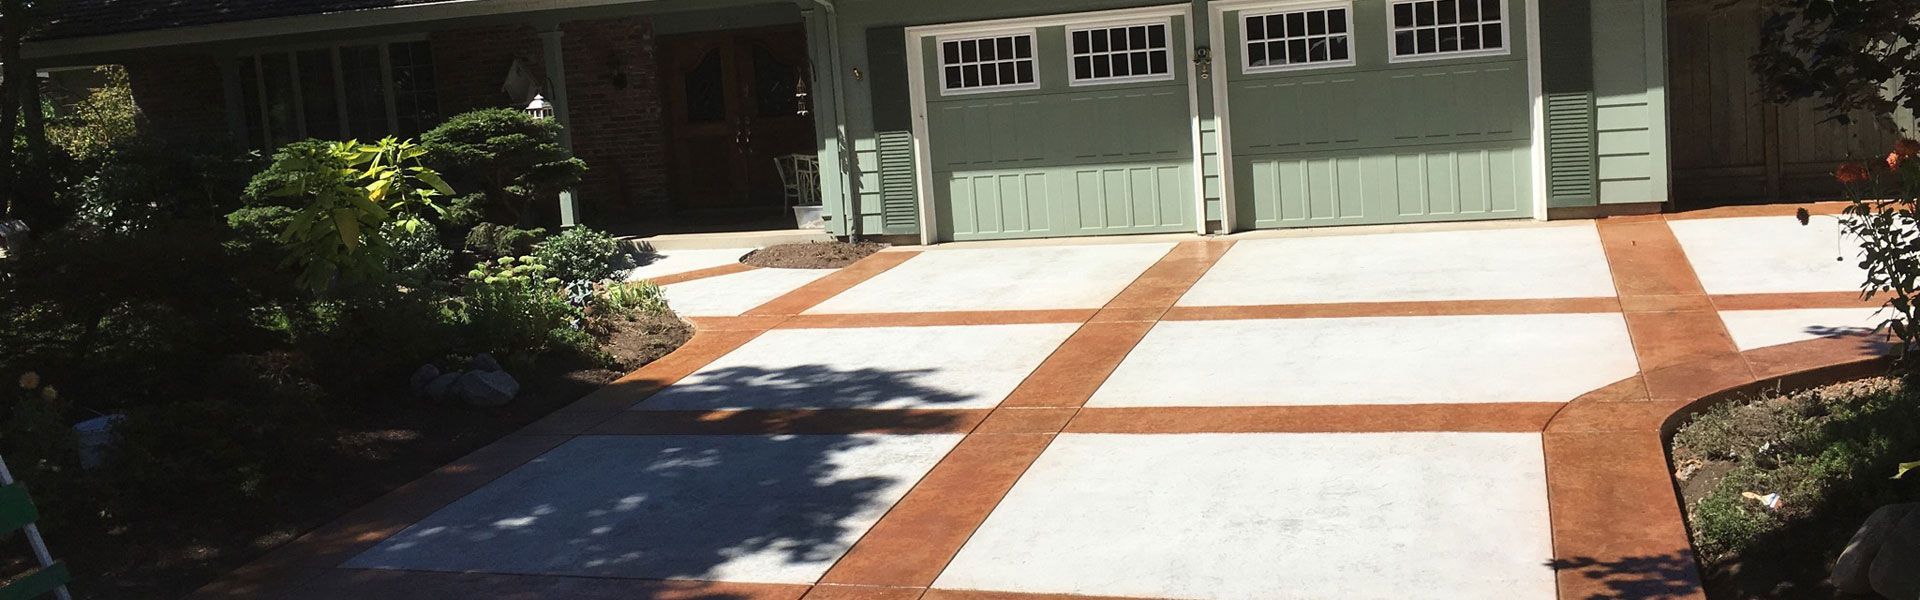 Slide Stamped Driveway with Ribbon — Springfield, OR — Natco Development LLC